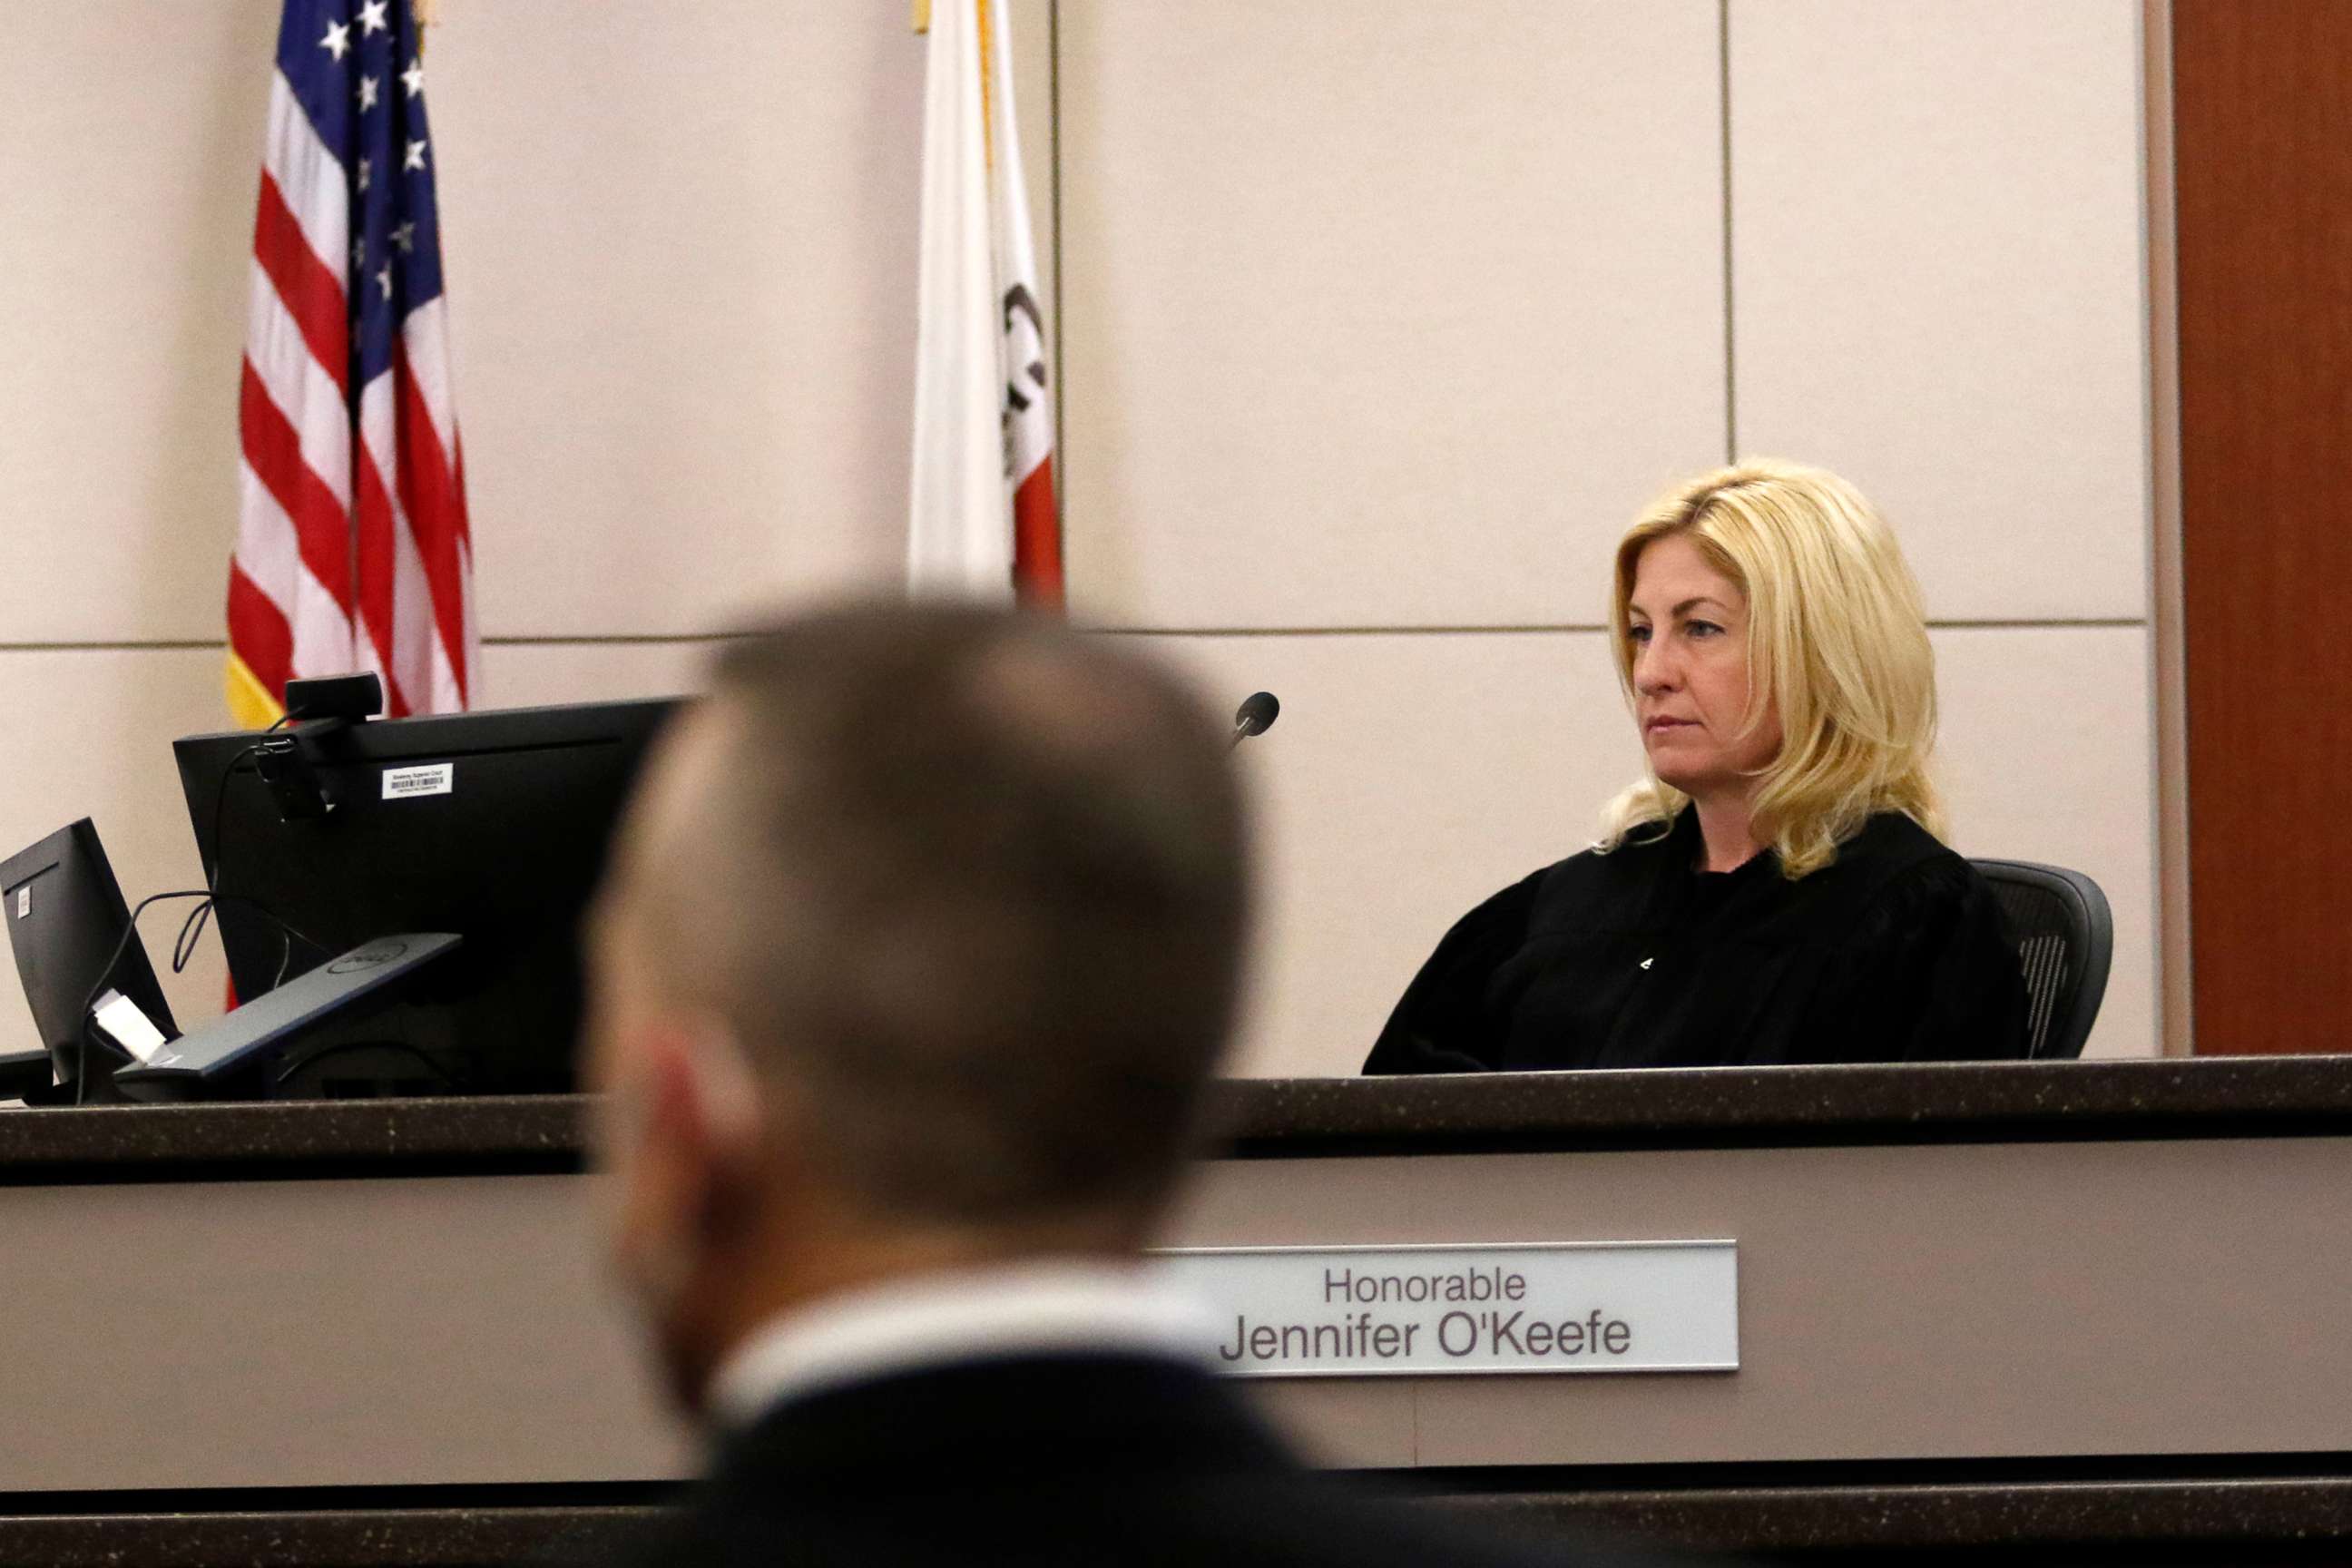 PHOTO: Paul Flores listens during the closing arguments as Judge Jennifer O'keefe presides in the Kristin Smart murder trial on Oct. 3, 2022 in Salinas, Calif.  Flores is accused of the murder of Kristin Smart.